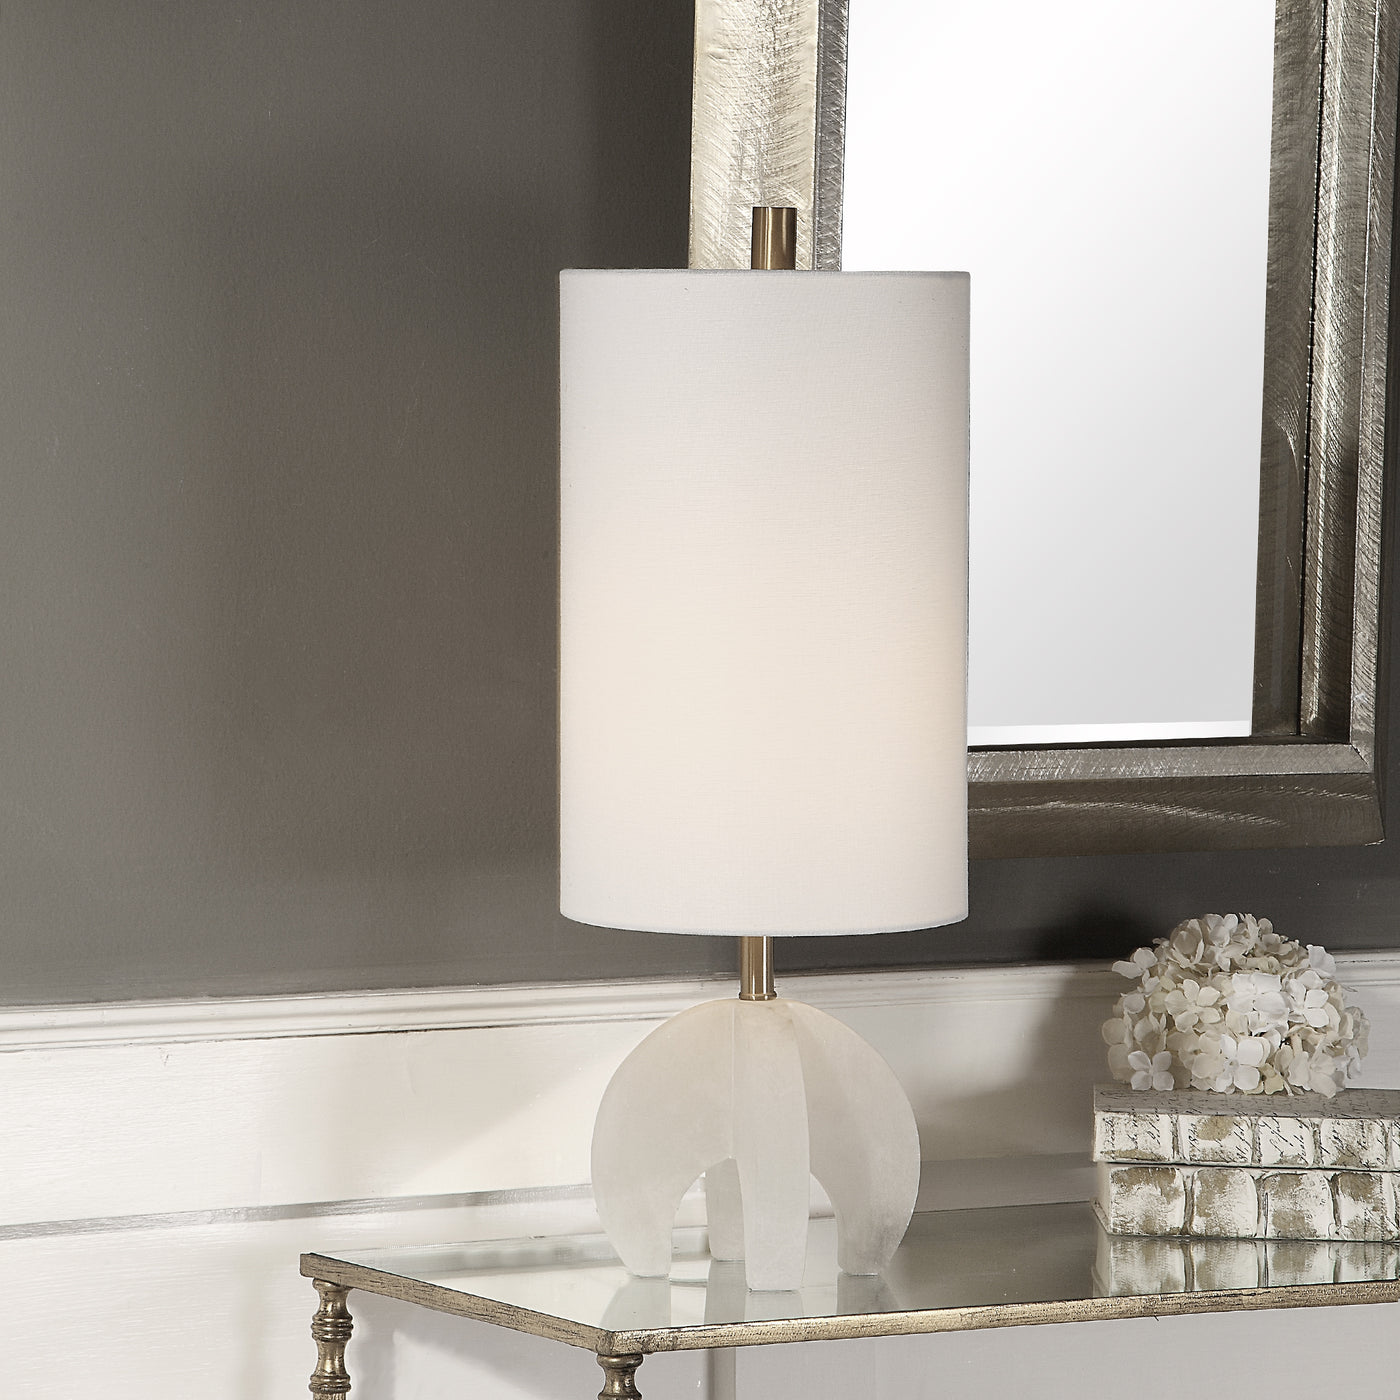 This Accent Lamp Keeps It Simple With A Uniquely Shaped, Polished Alabaster Base, Accented With Plated Brushed Brass Detai...